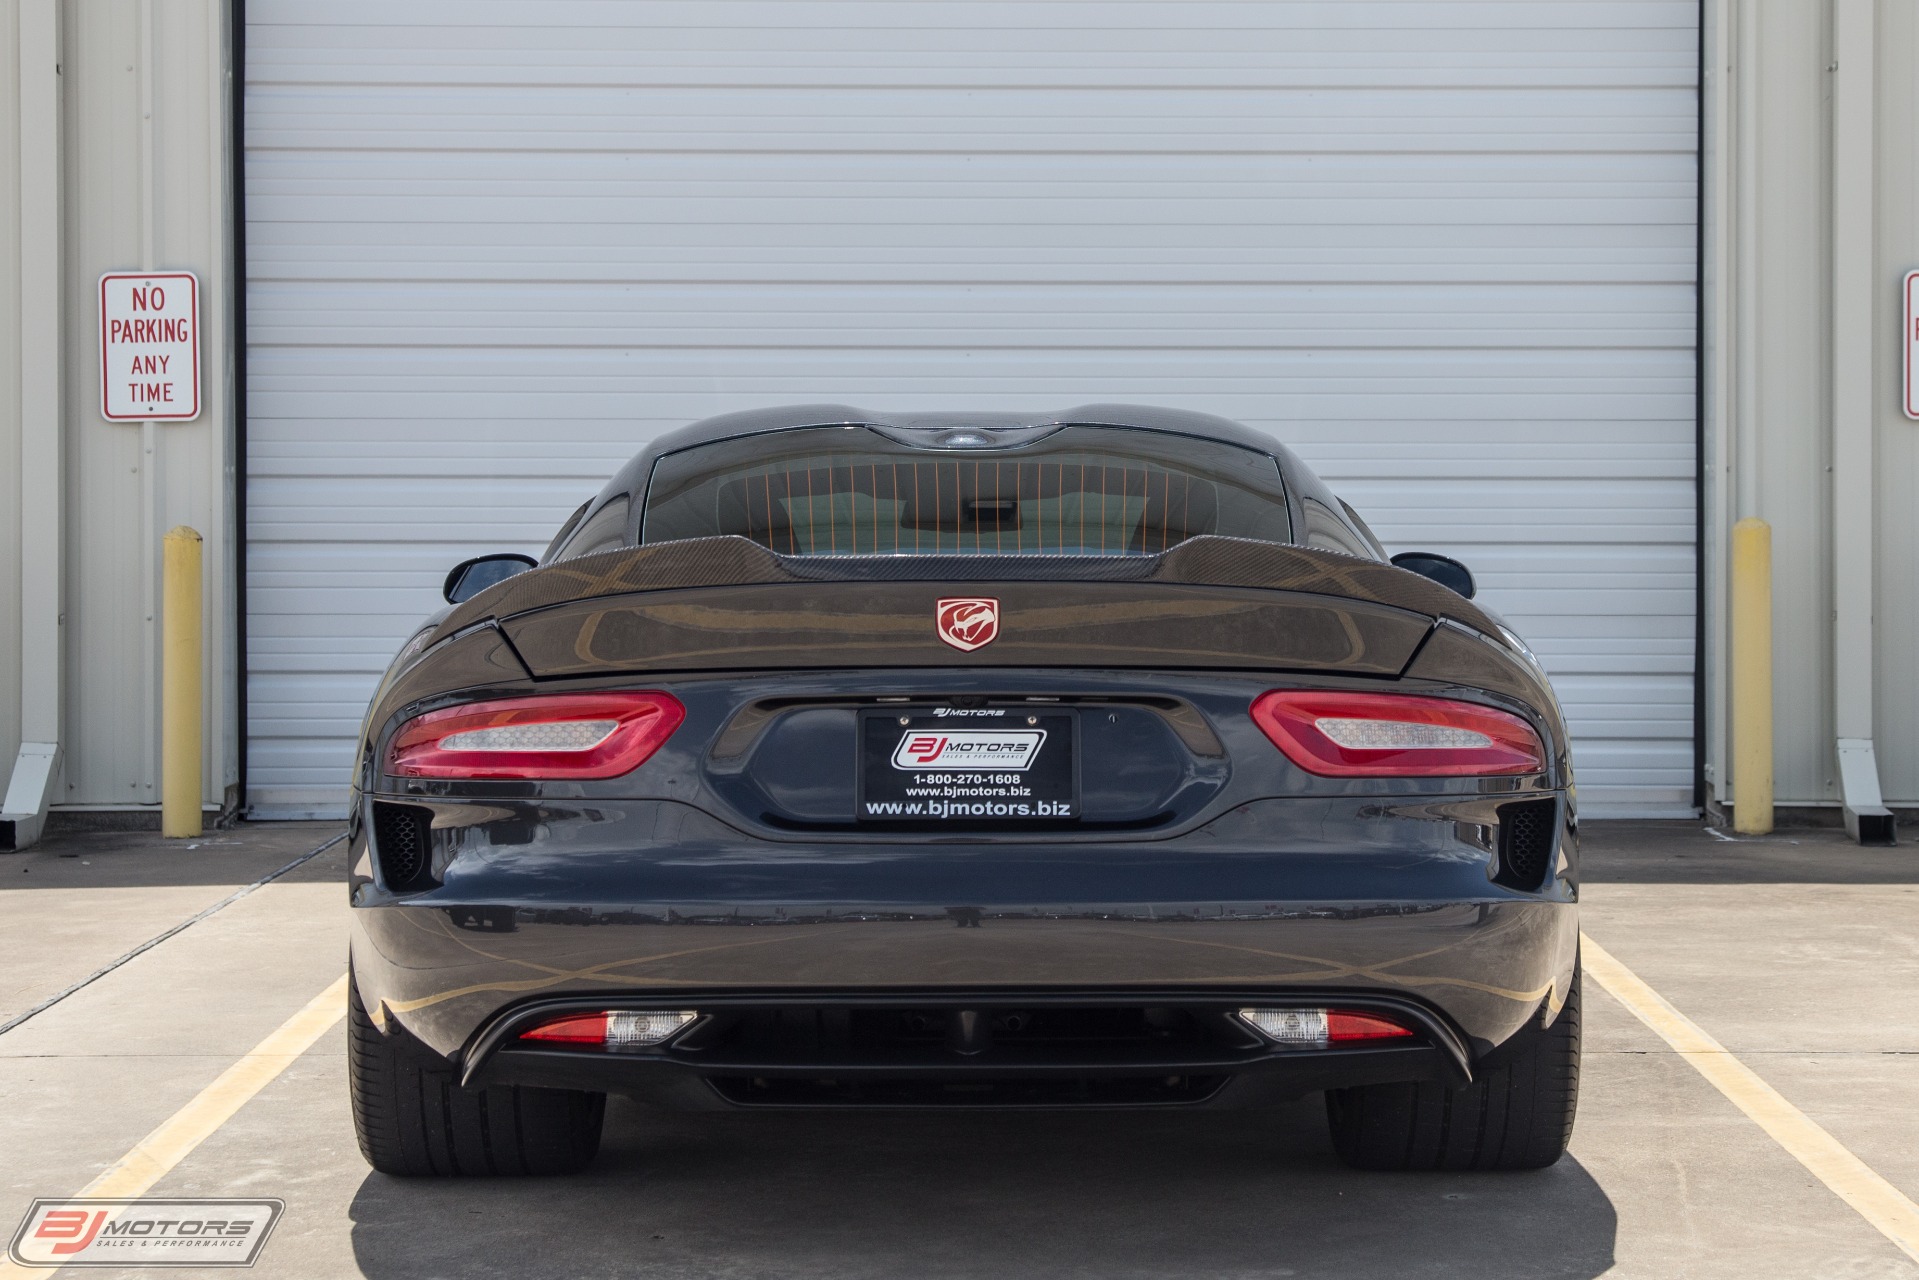 New-2015-Dodge-Viper-Viper-Exchange-Stage-II-Heads-and-Cam